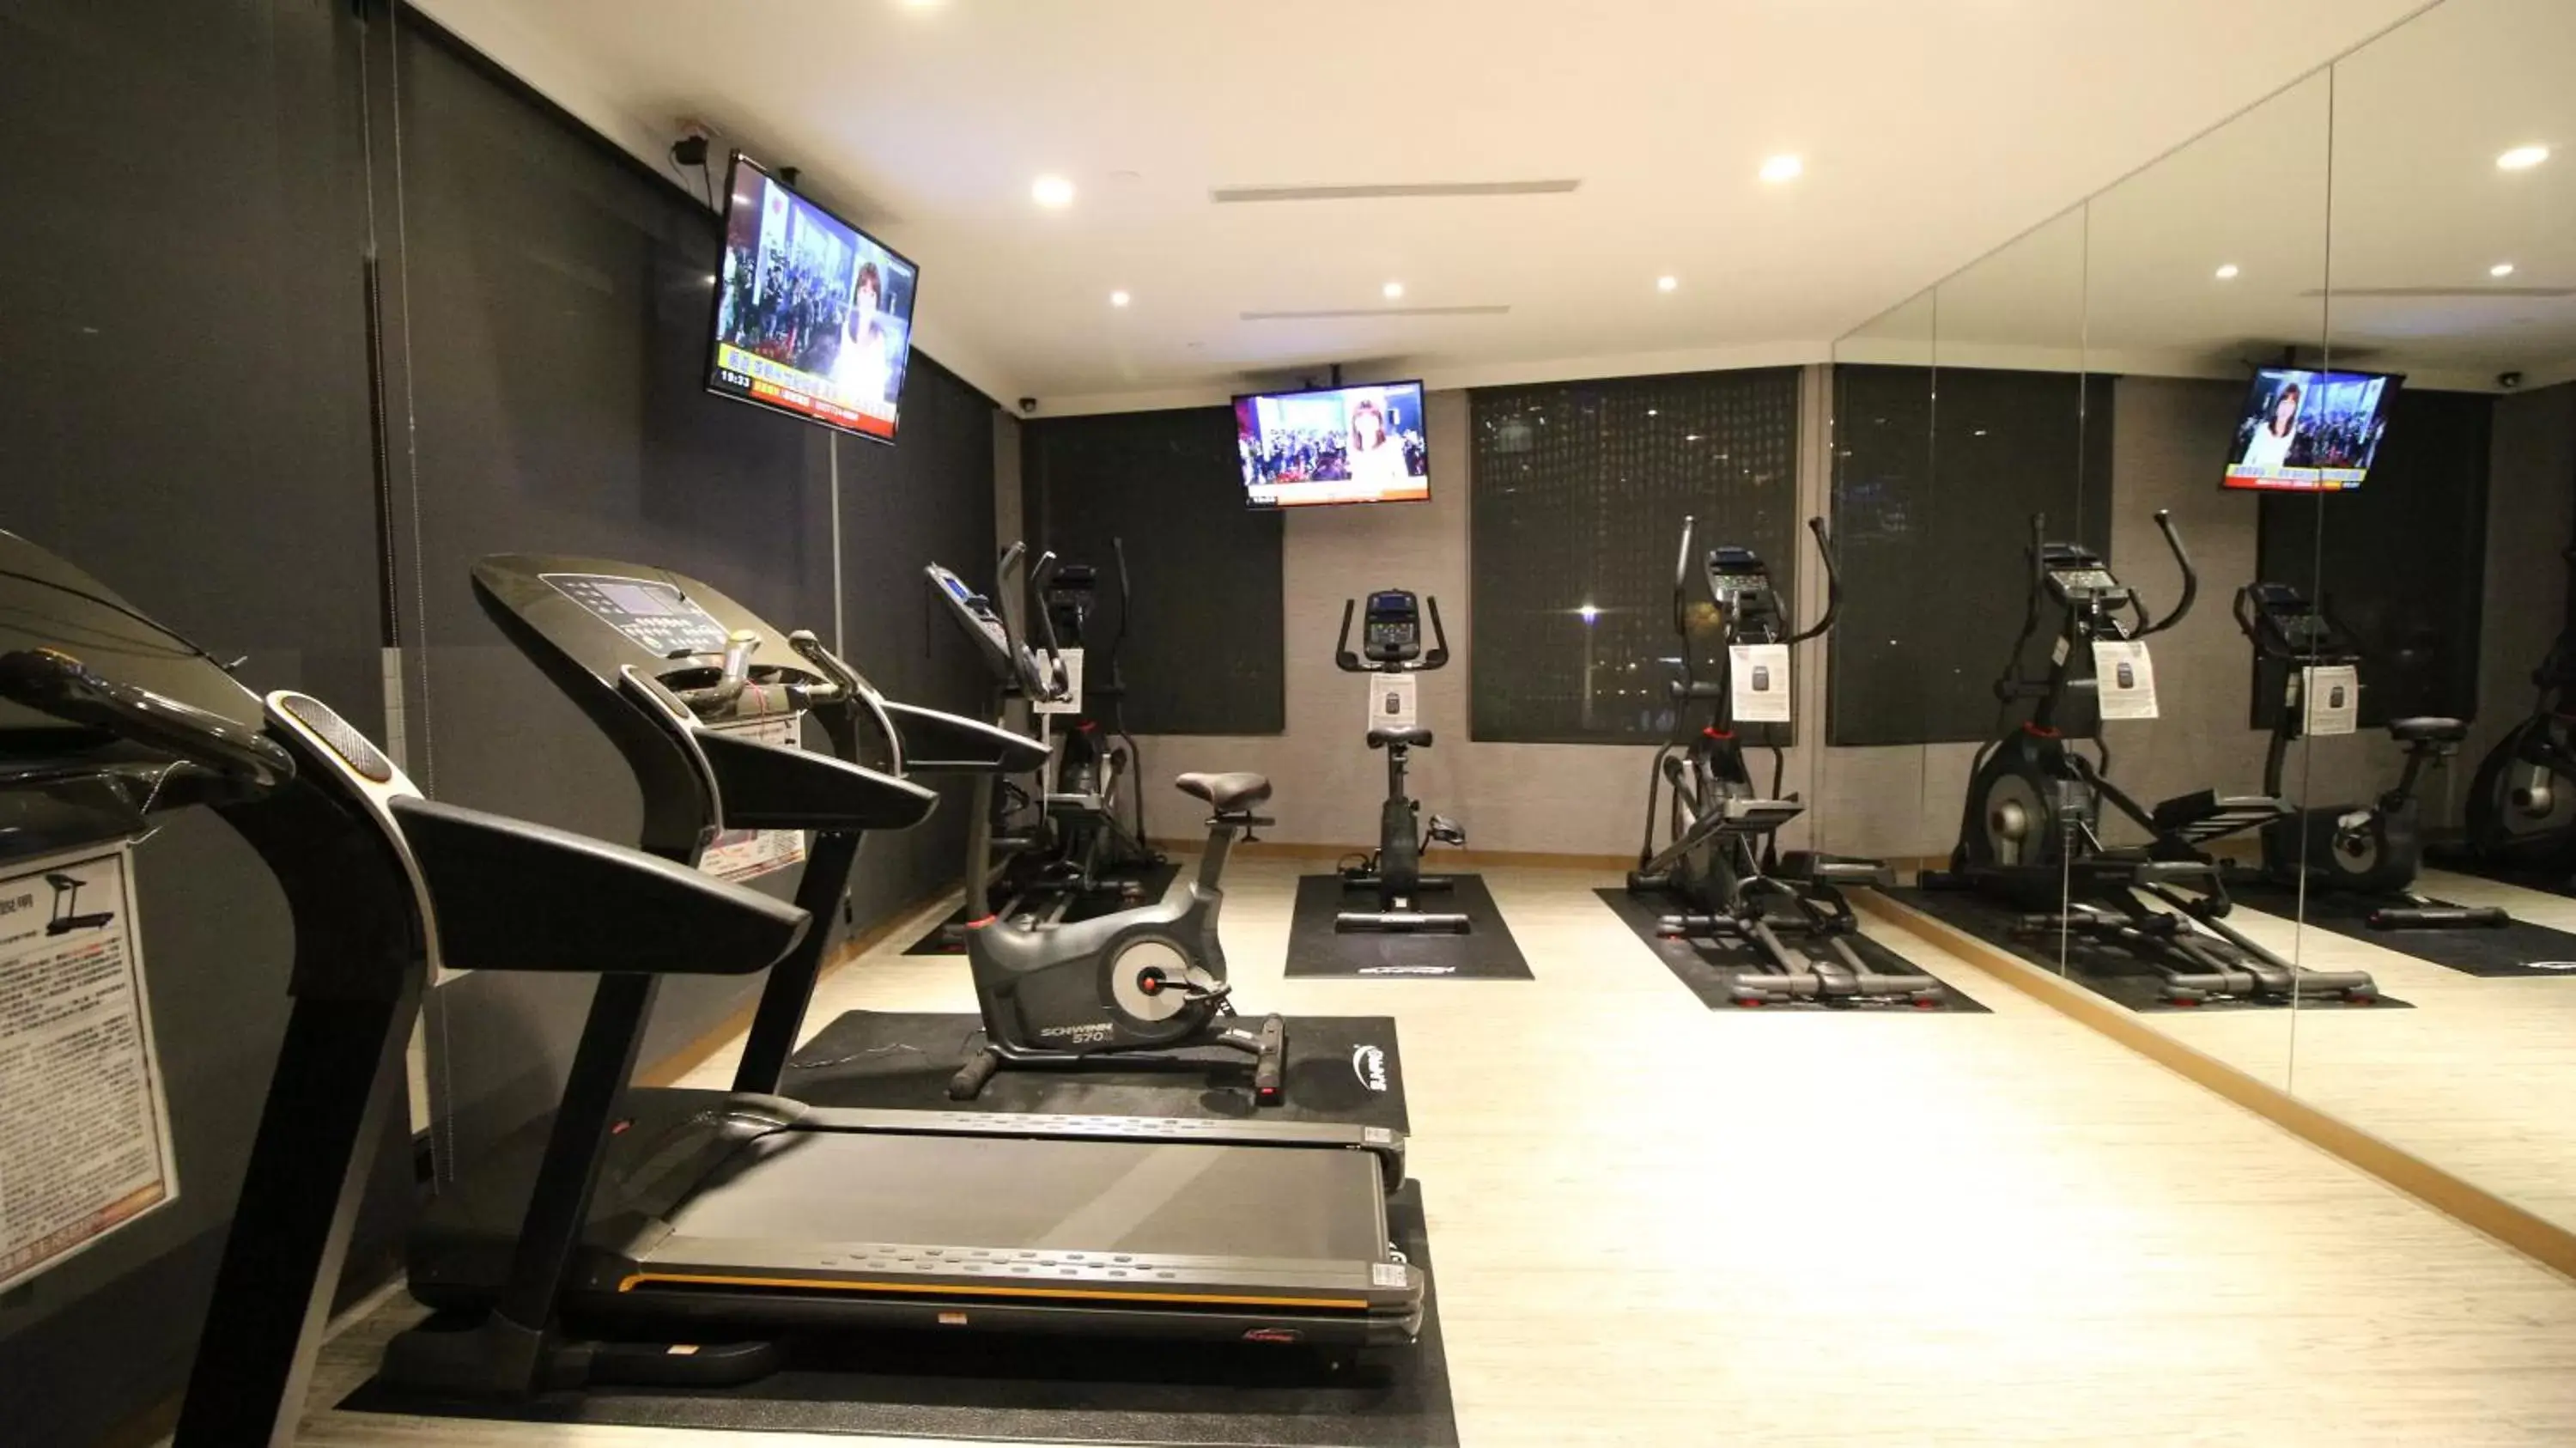 Fitness centre/facilities, Fitness Center/Facilities in Harbour 10 Hotel